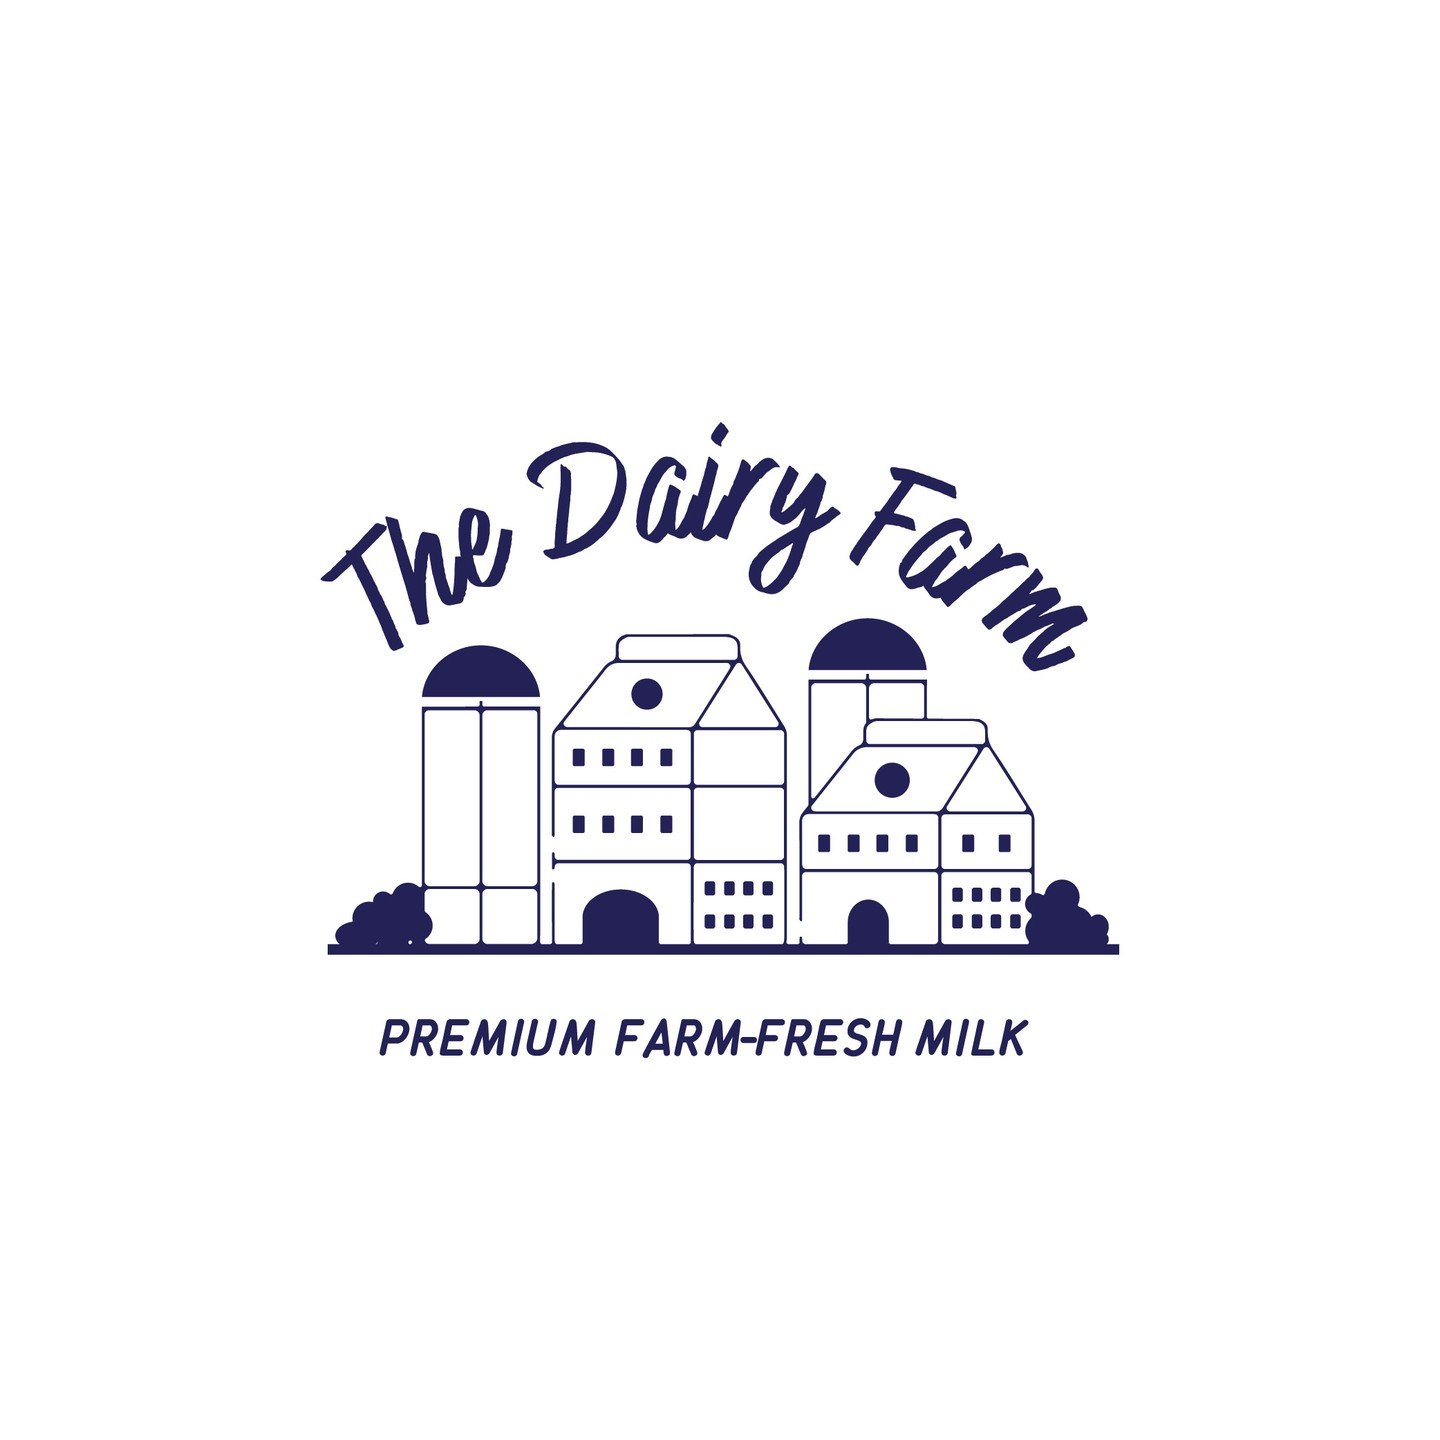 My entry for The Dairy Farm supplied by @thebriefdiary:

The Dairy Farm is known for its premium, farm-fresh milk sourced from local, grass-fed cows. With a commitment to quality, their products boast rich, creamy textures and a distinctively wholeso